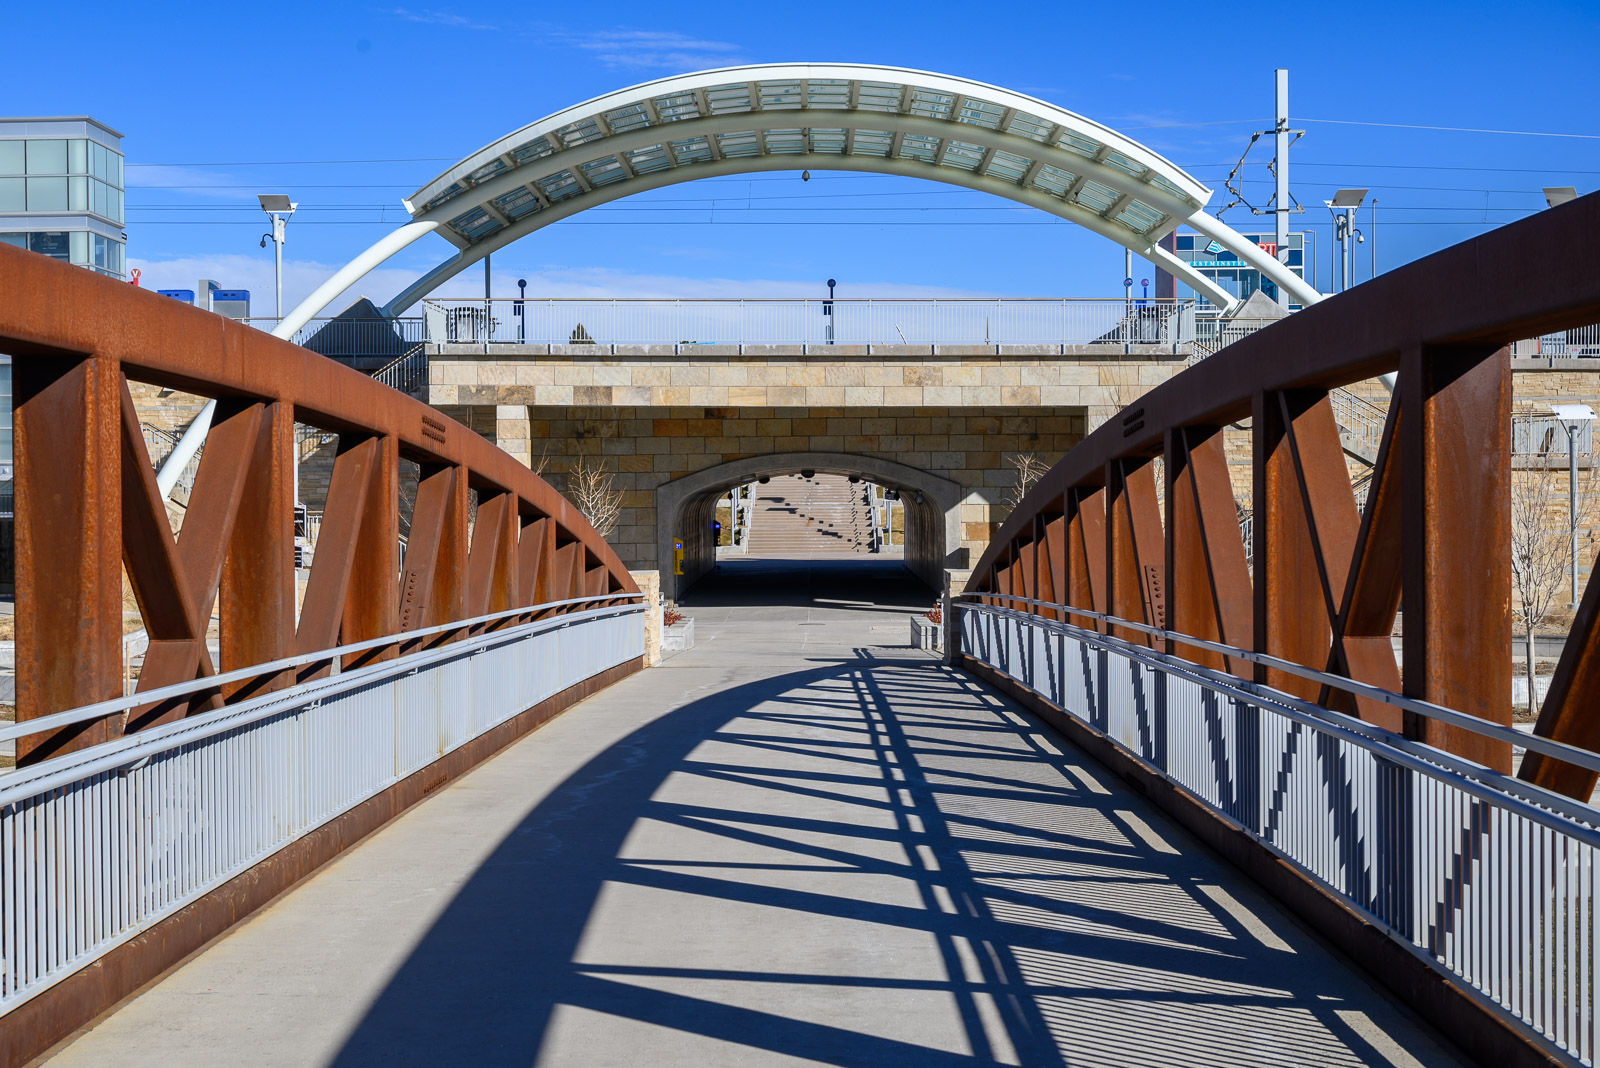 Curved bridge trusses cast strong shadows on the approach to Westminster Station near Denver, Colorado.